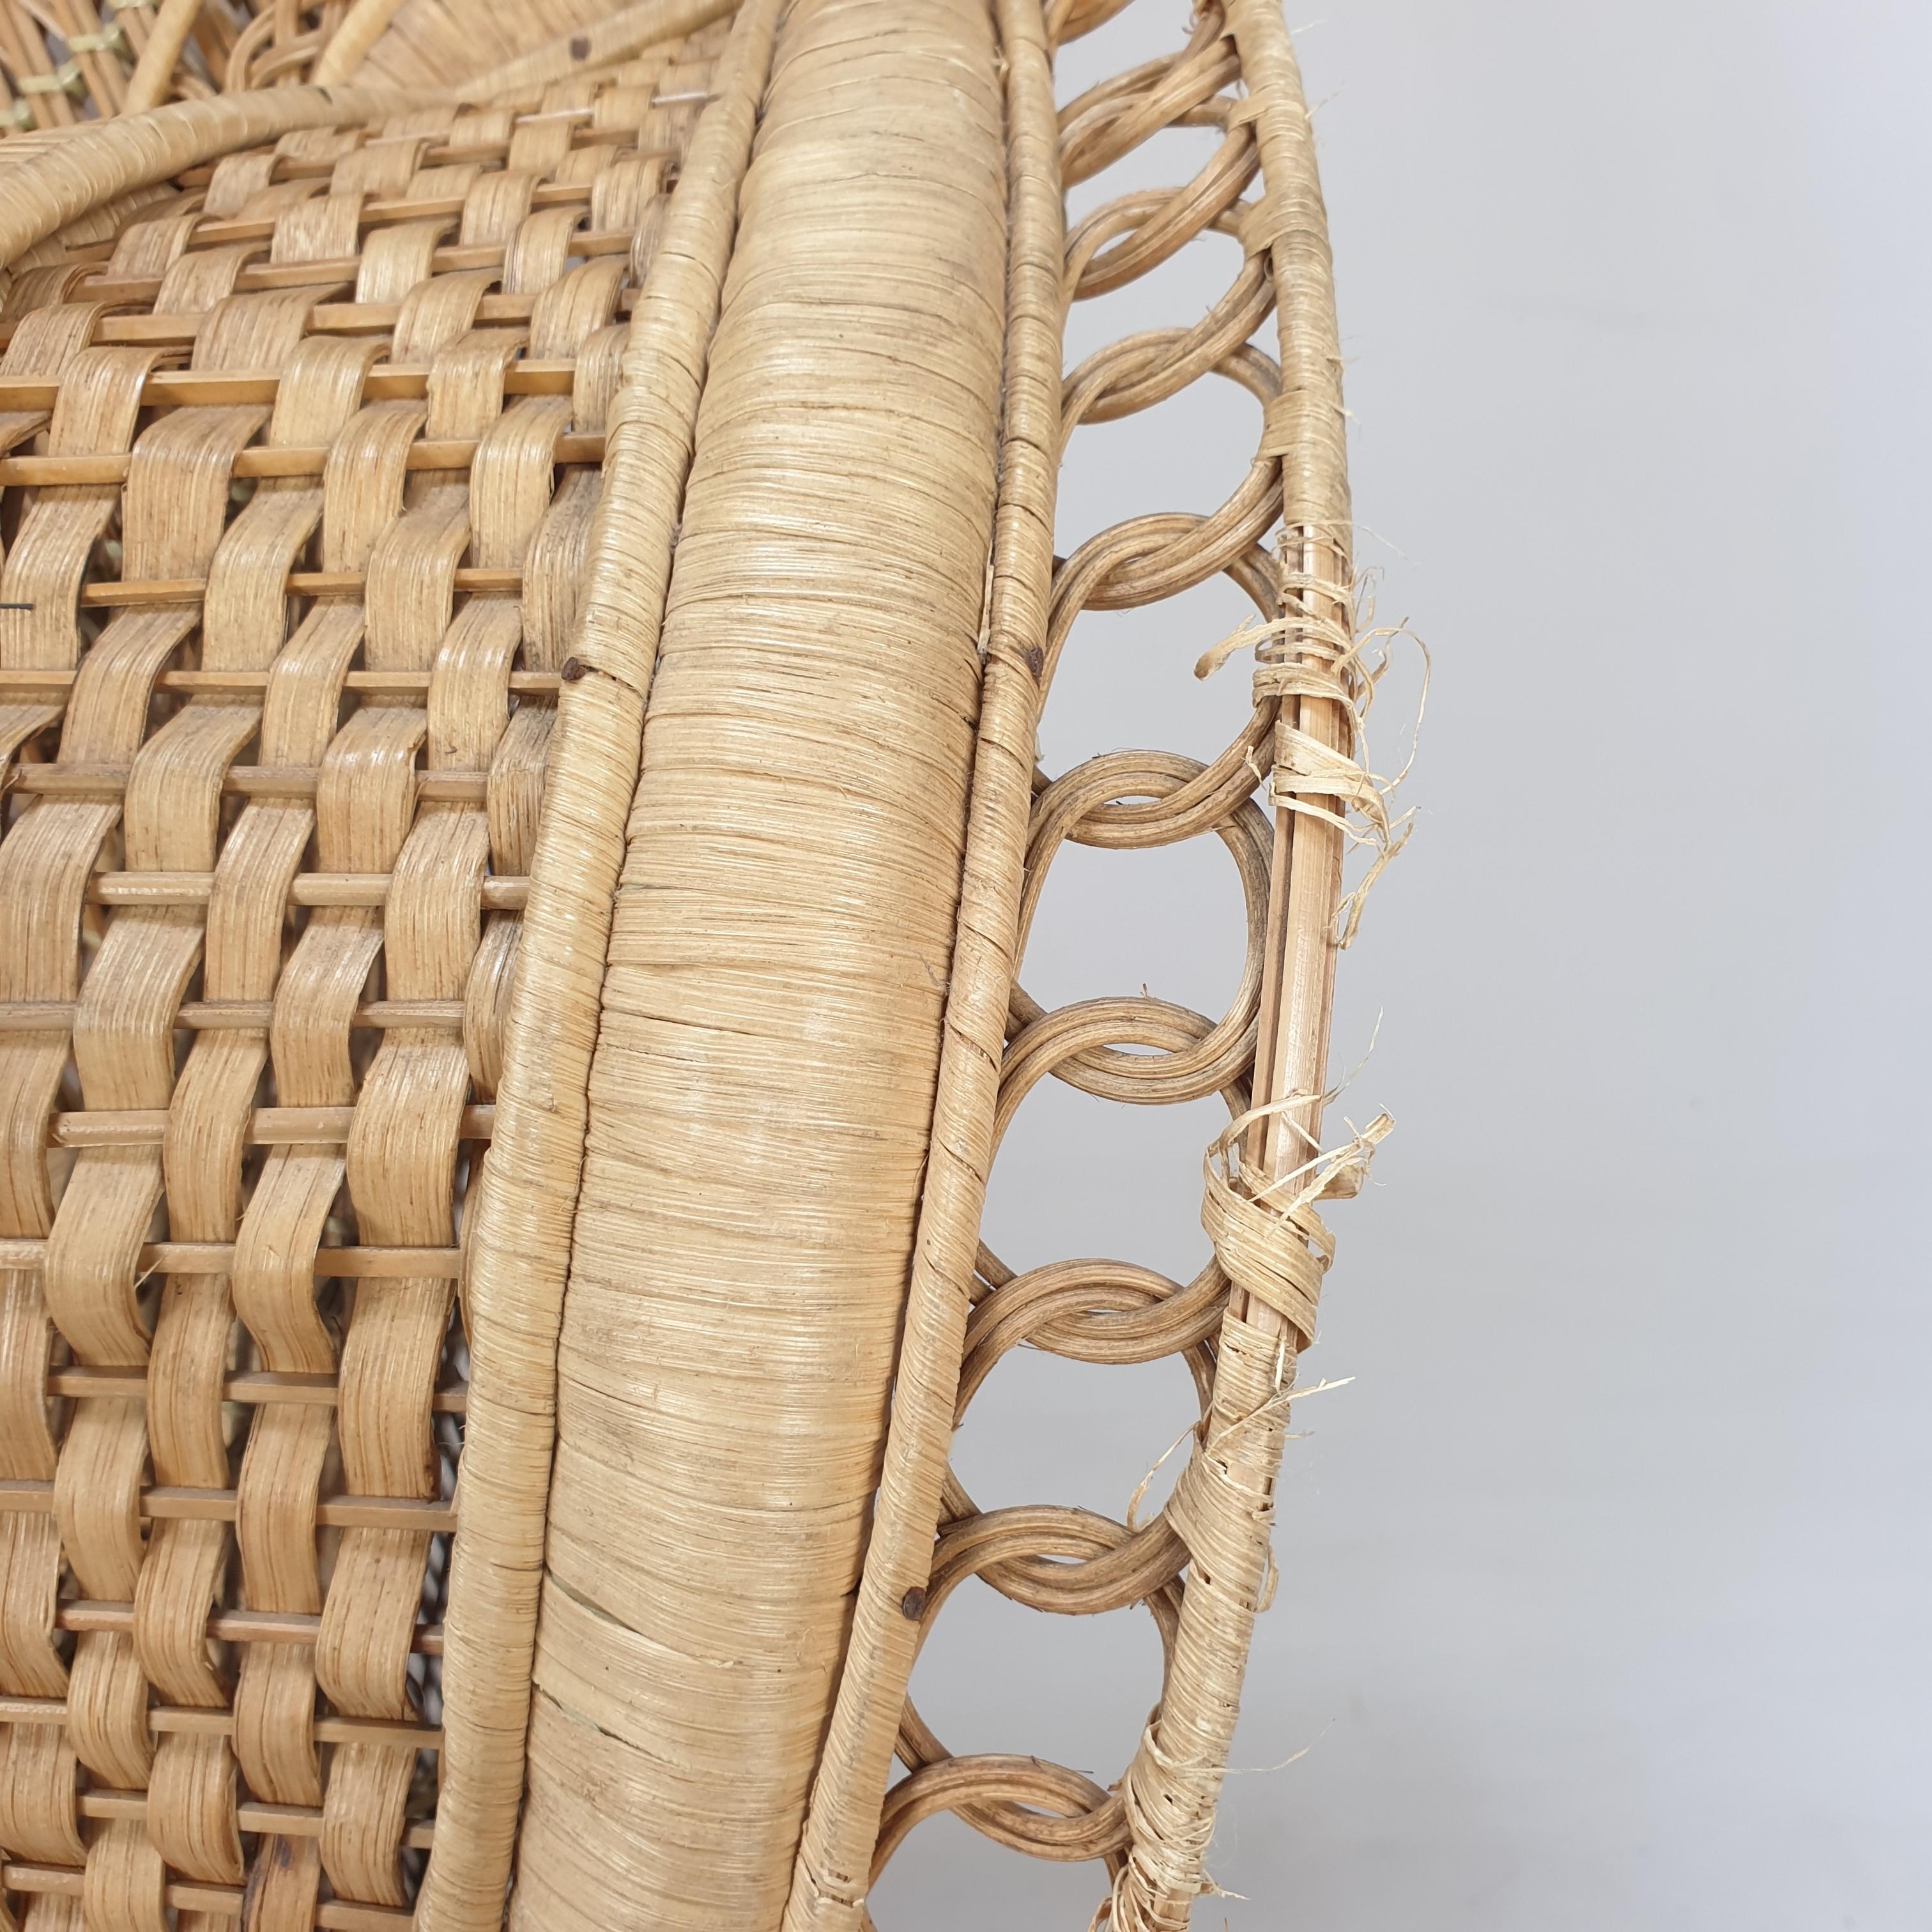 Midcentury Emmanuelle or Peacock Rattan and Wicker Chair, Italy 1960s For Sale 9